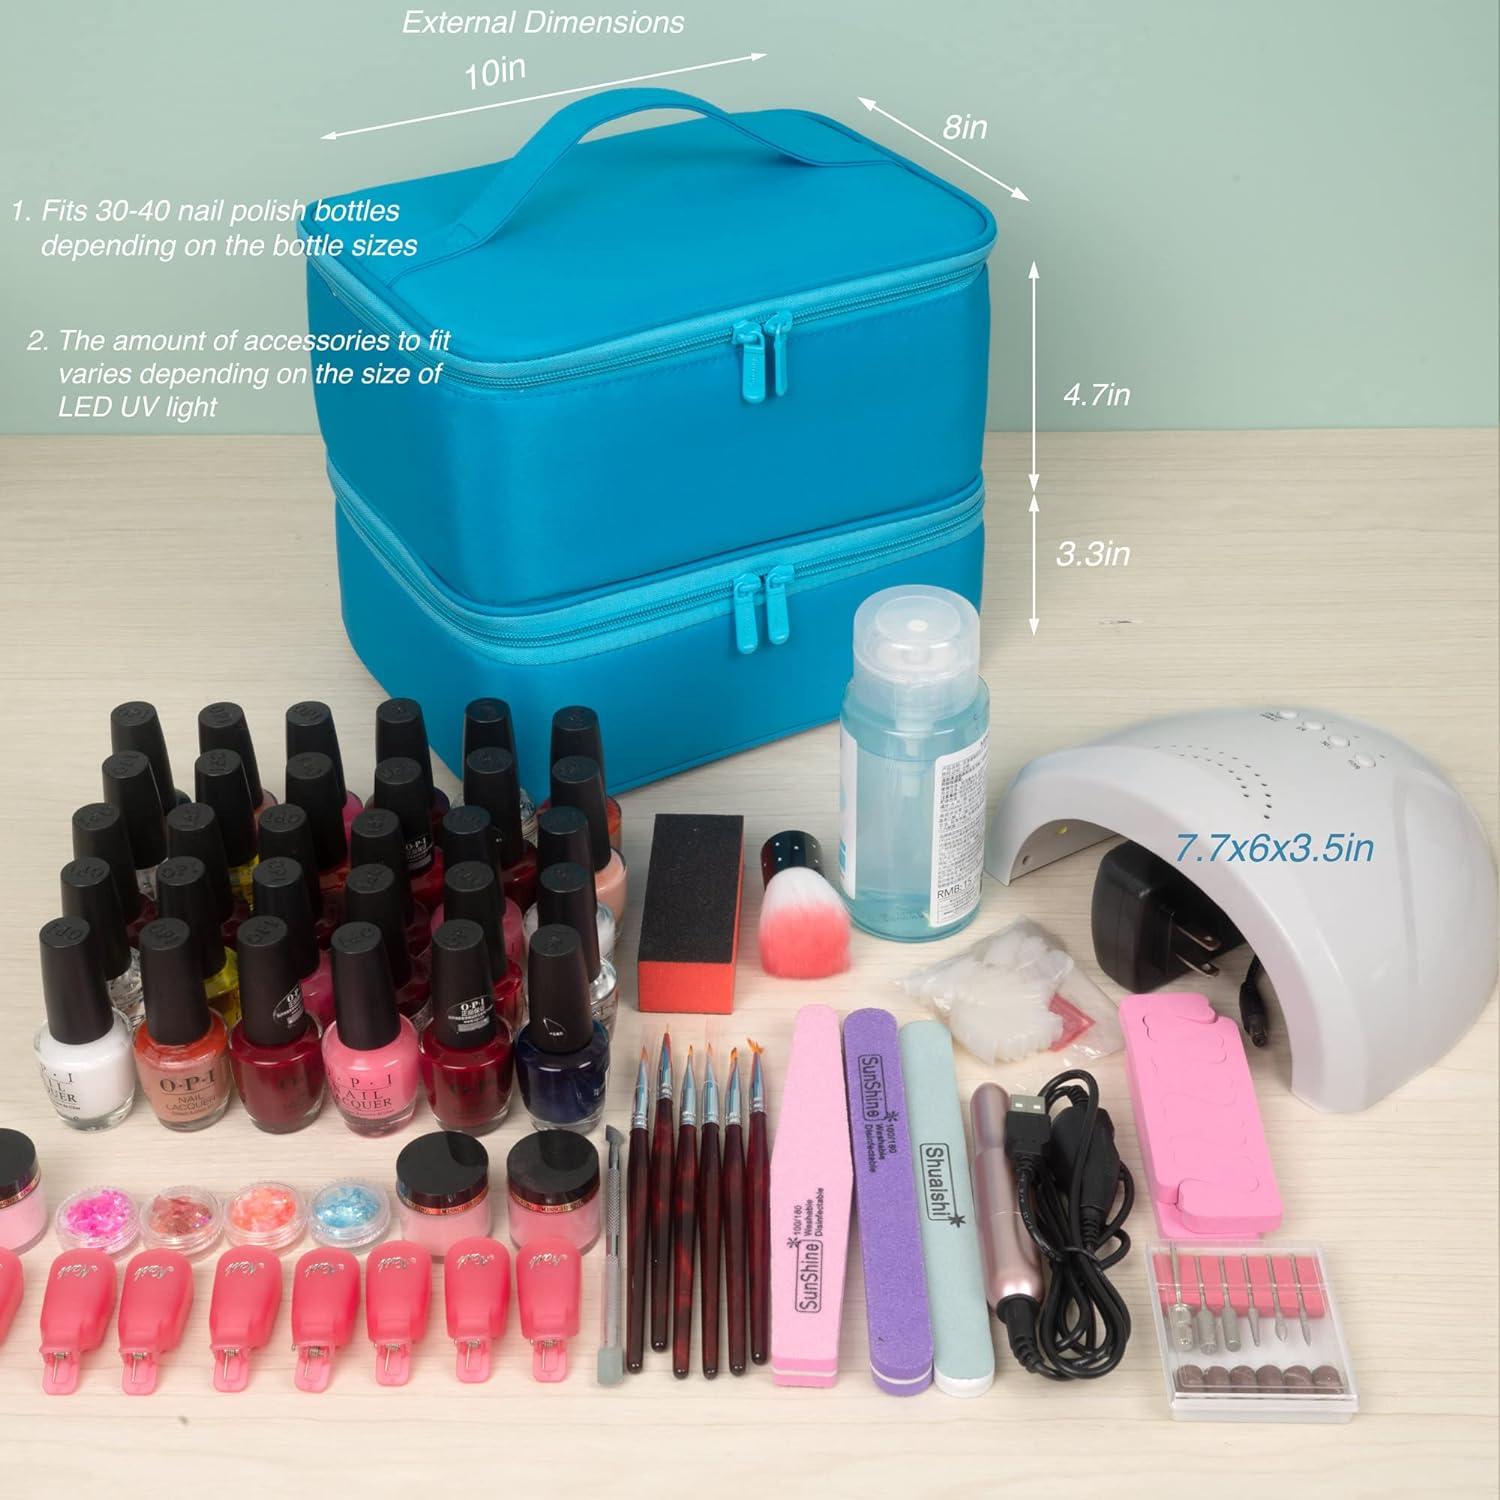 Large Nail Care Manicure Storage Organizer Carrying Case Bag, Fits